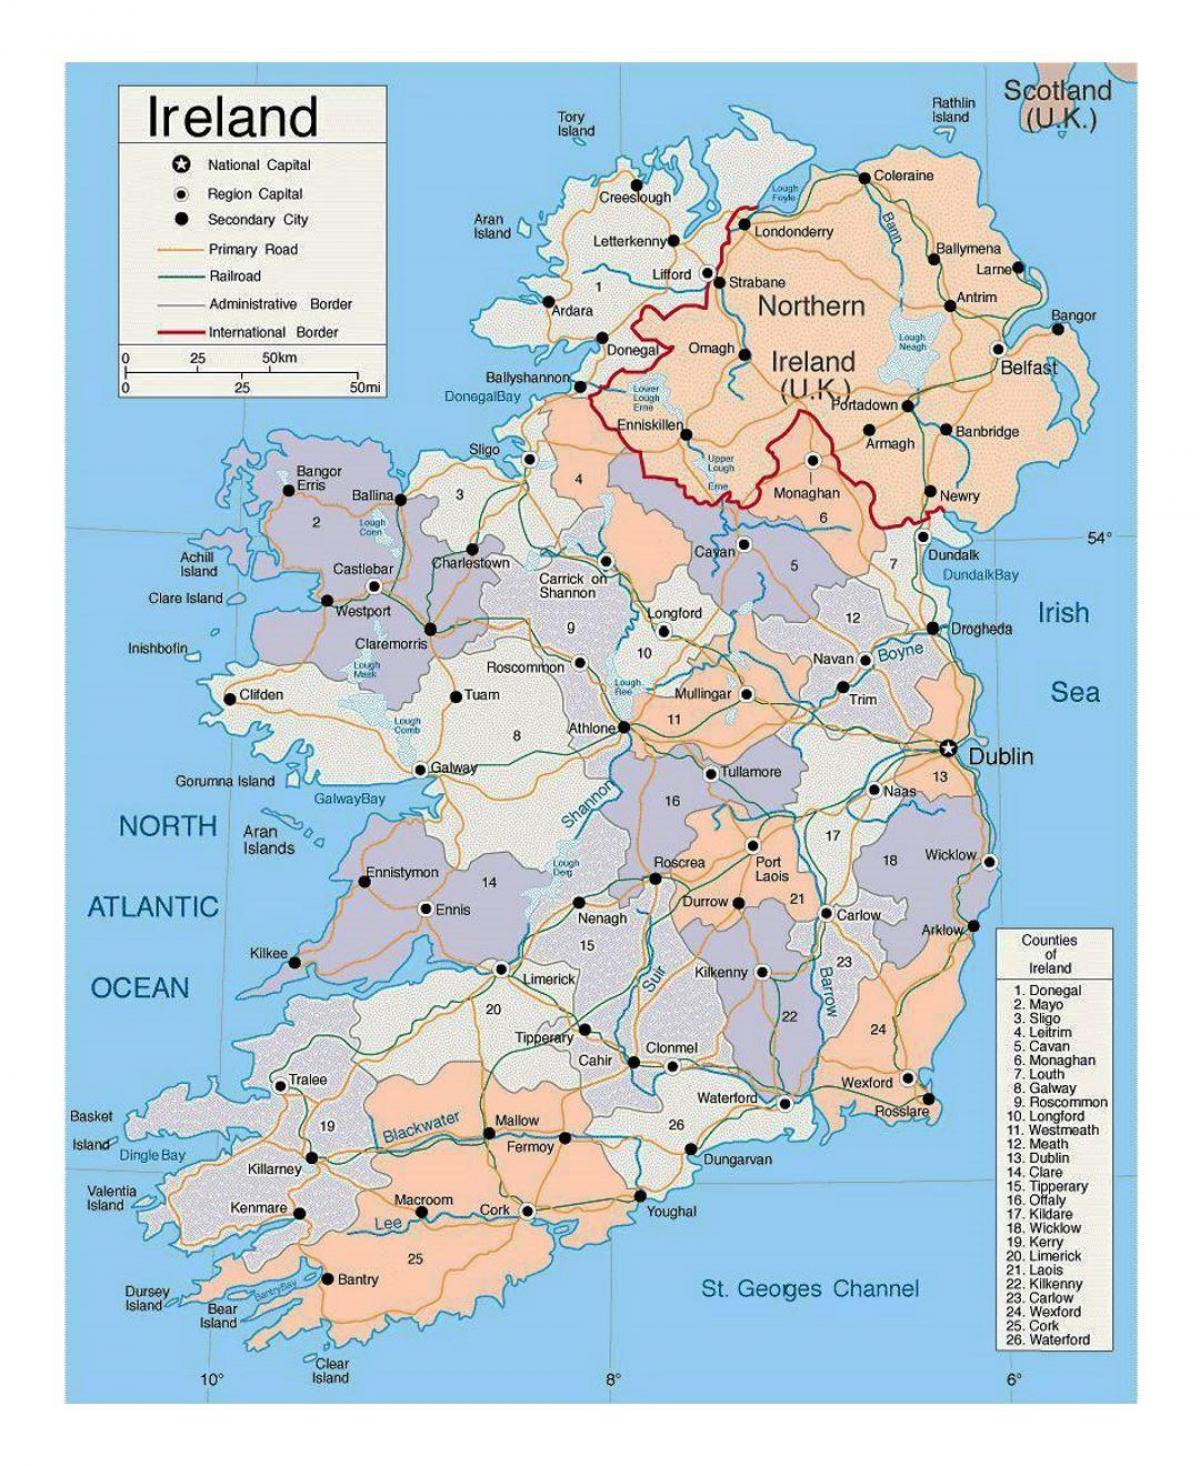 ireland-cities-map-map-of-ireland-with-cities-northern-europe-europe